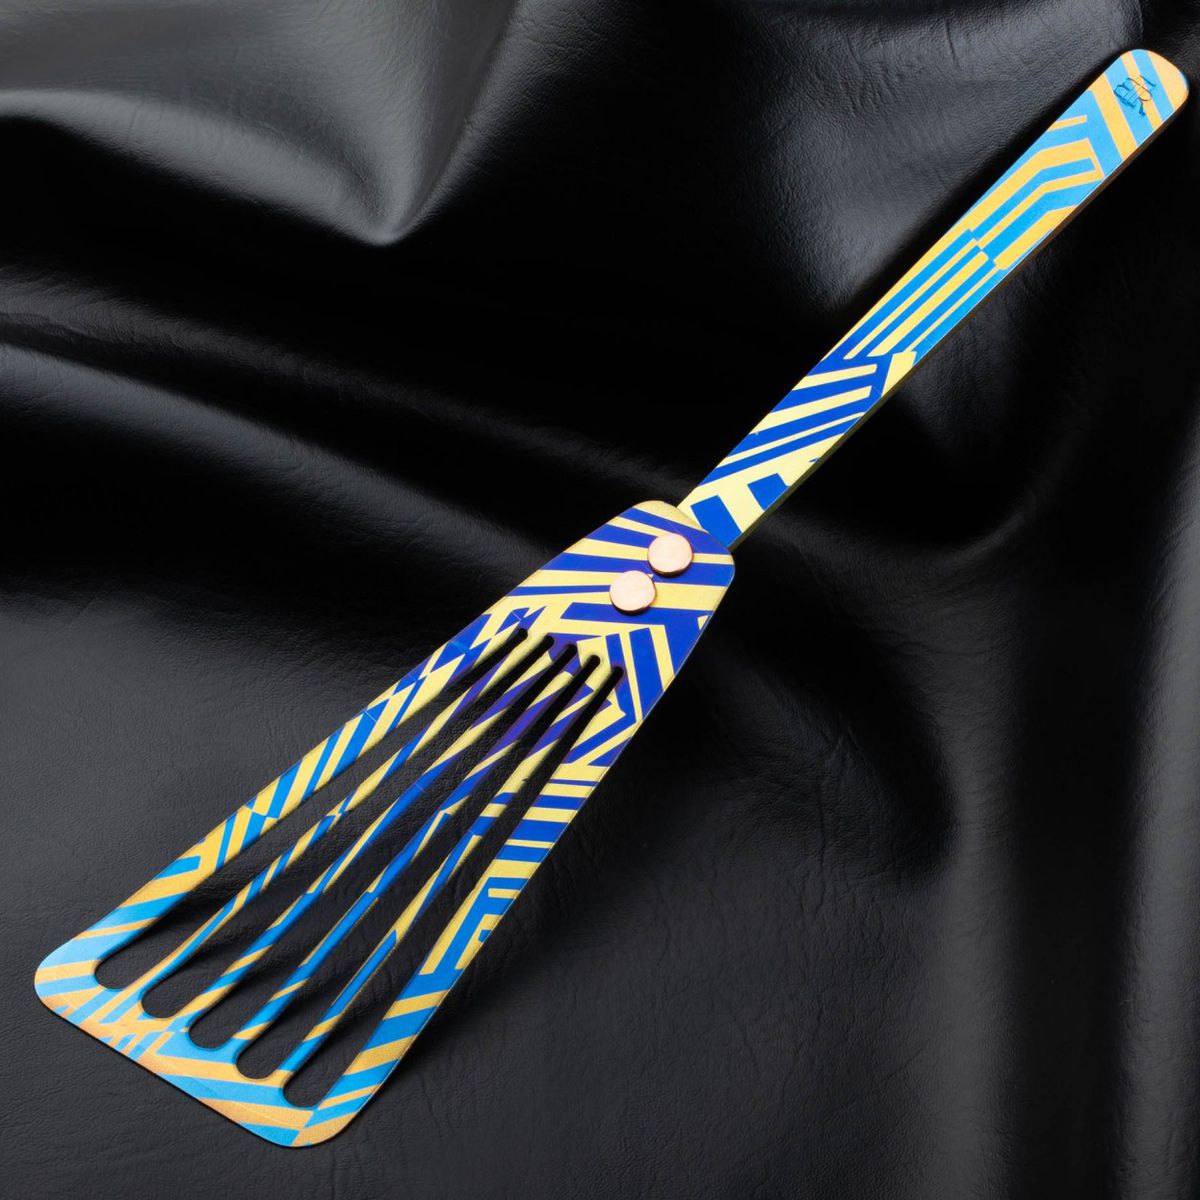 A fish spatula with a yellow and blue pattern